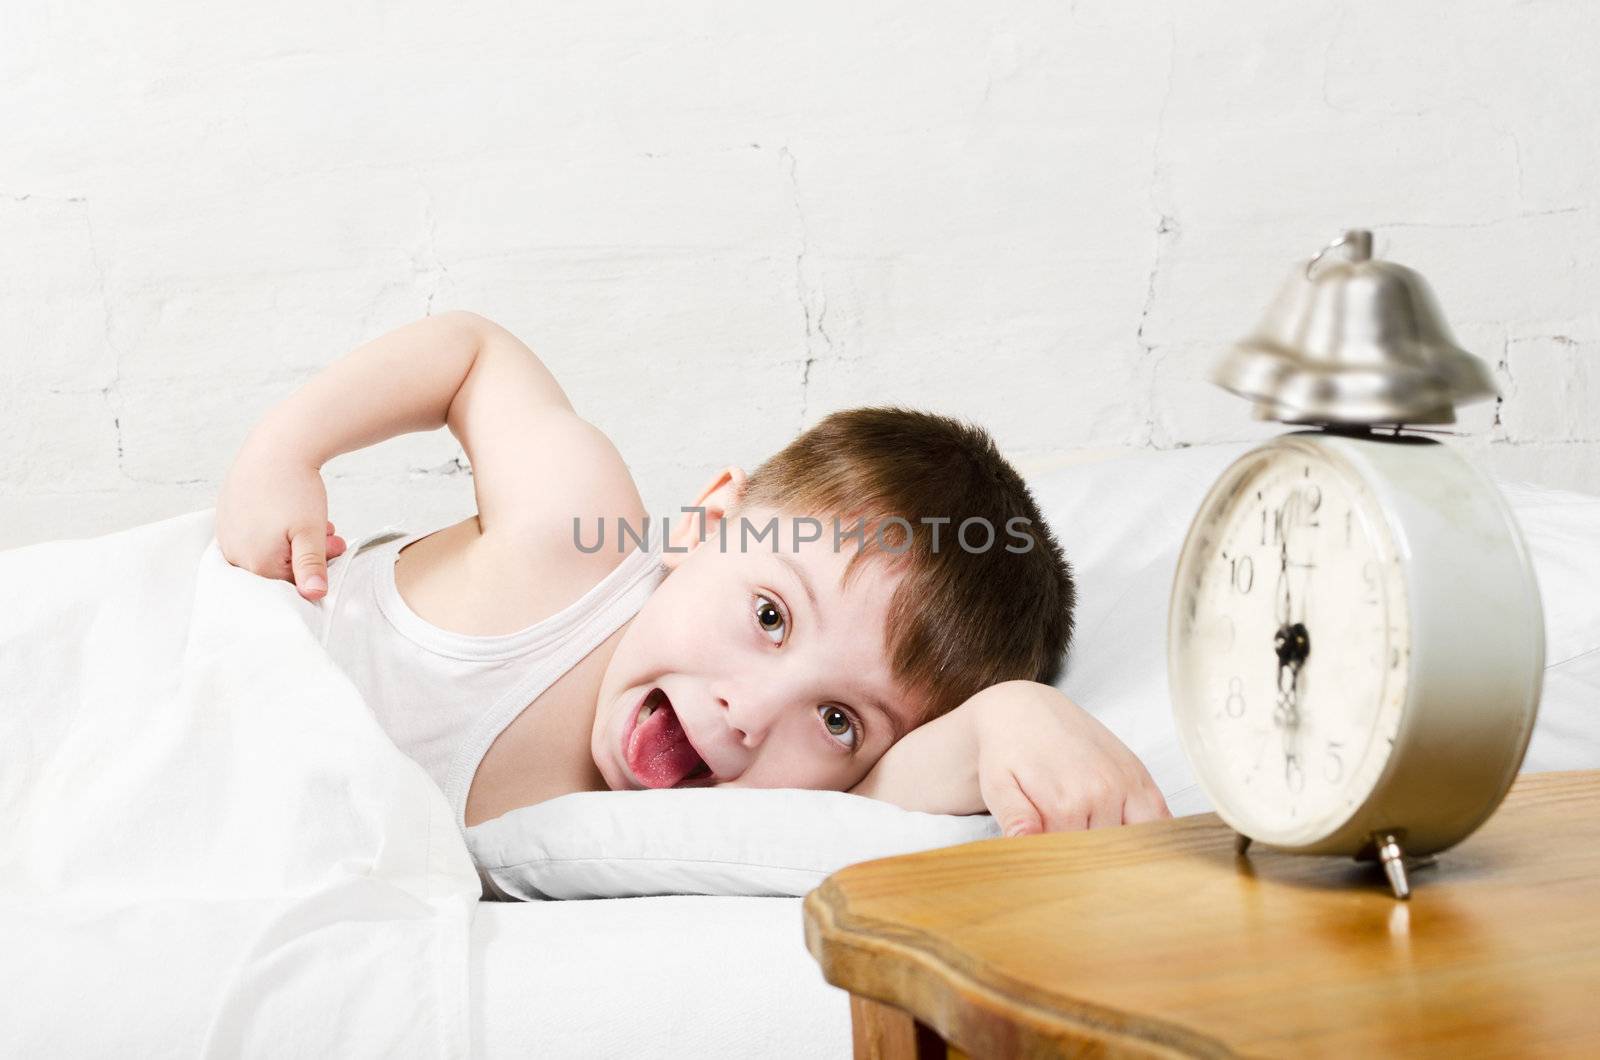 Small toddler boy (4 years old) is lying in bed and showing tongue. He is looking at the camera. Old clock show 6 o'clock. Brick wall